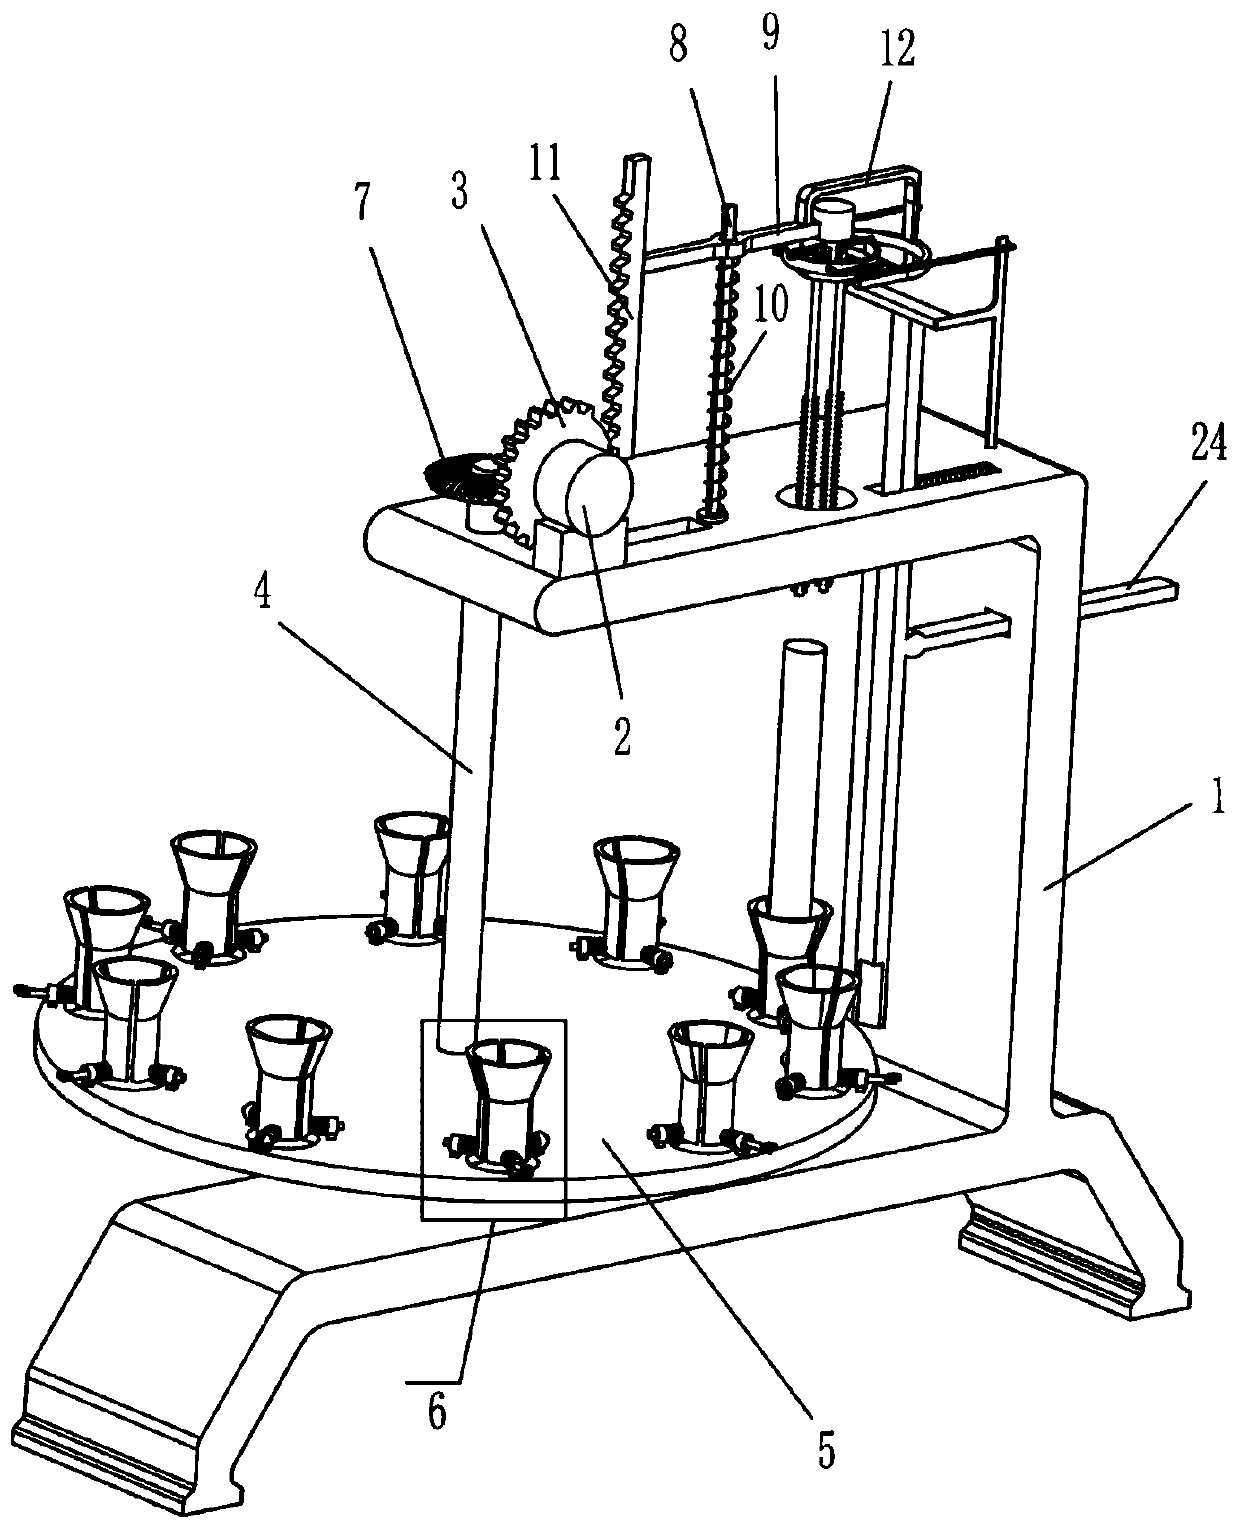 Cleaning device suitable for interiors of test tubes of different sizes